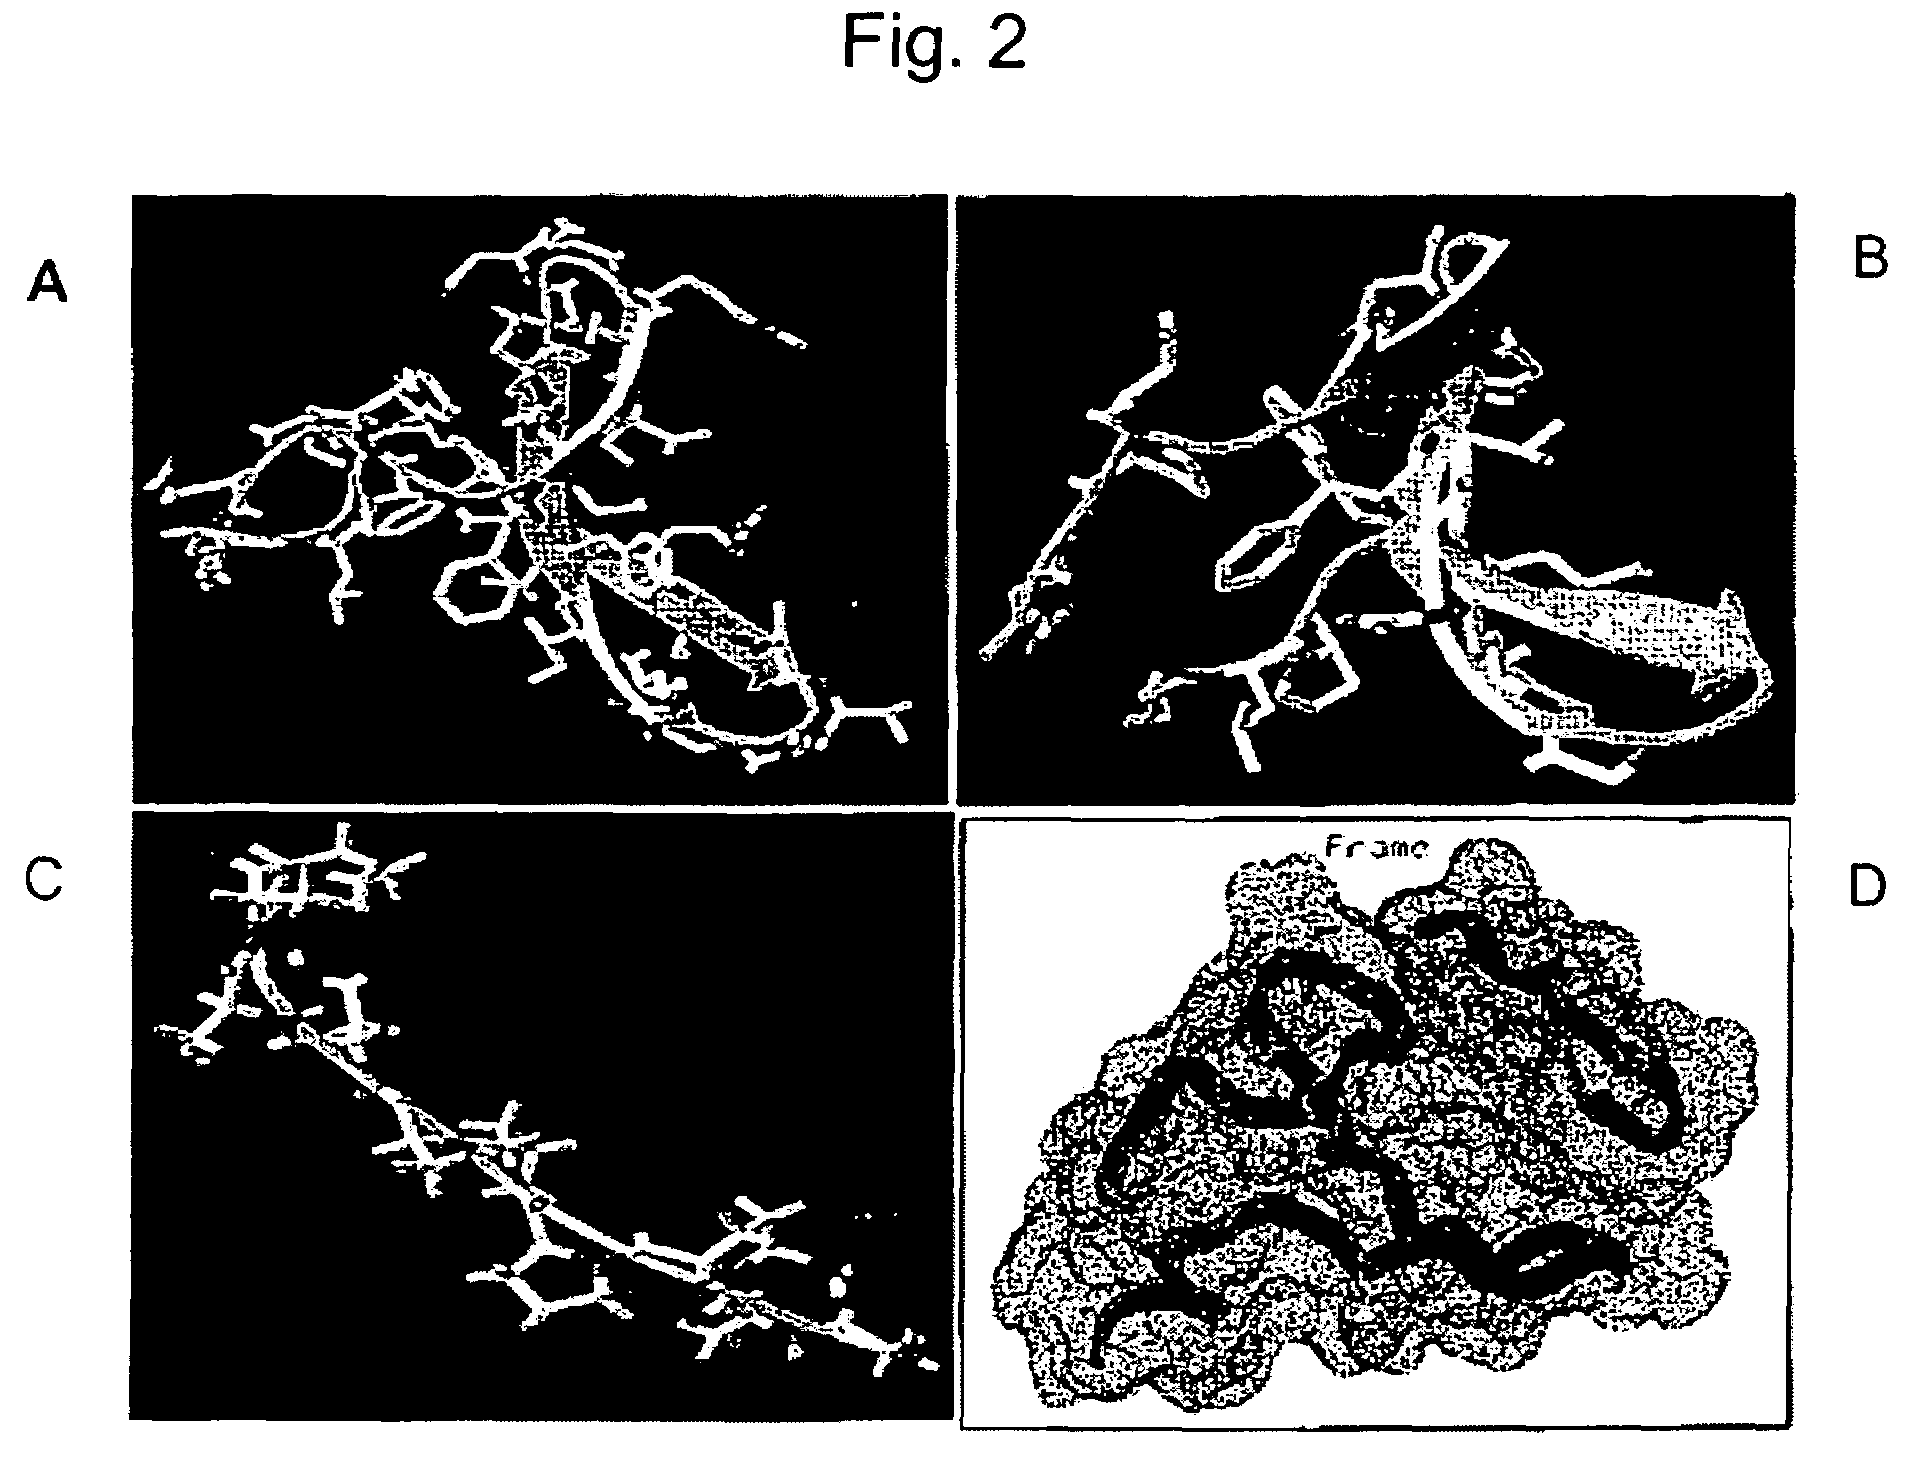 Methods and kits using a molecular interaction between a Smurf-1 WW domain and LIM mineralization protein isoforms